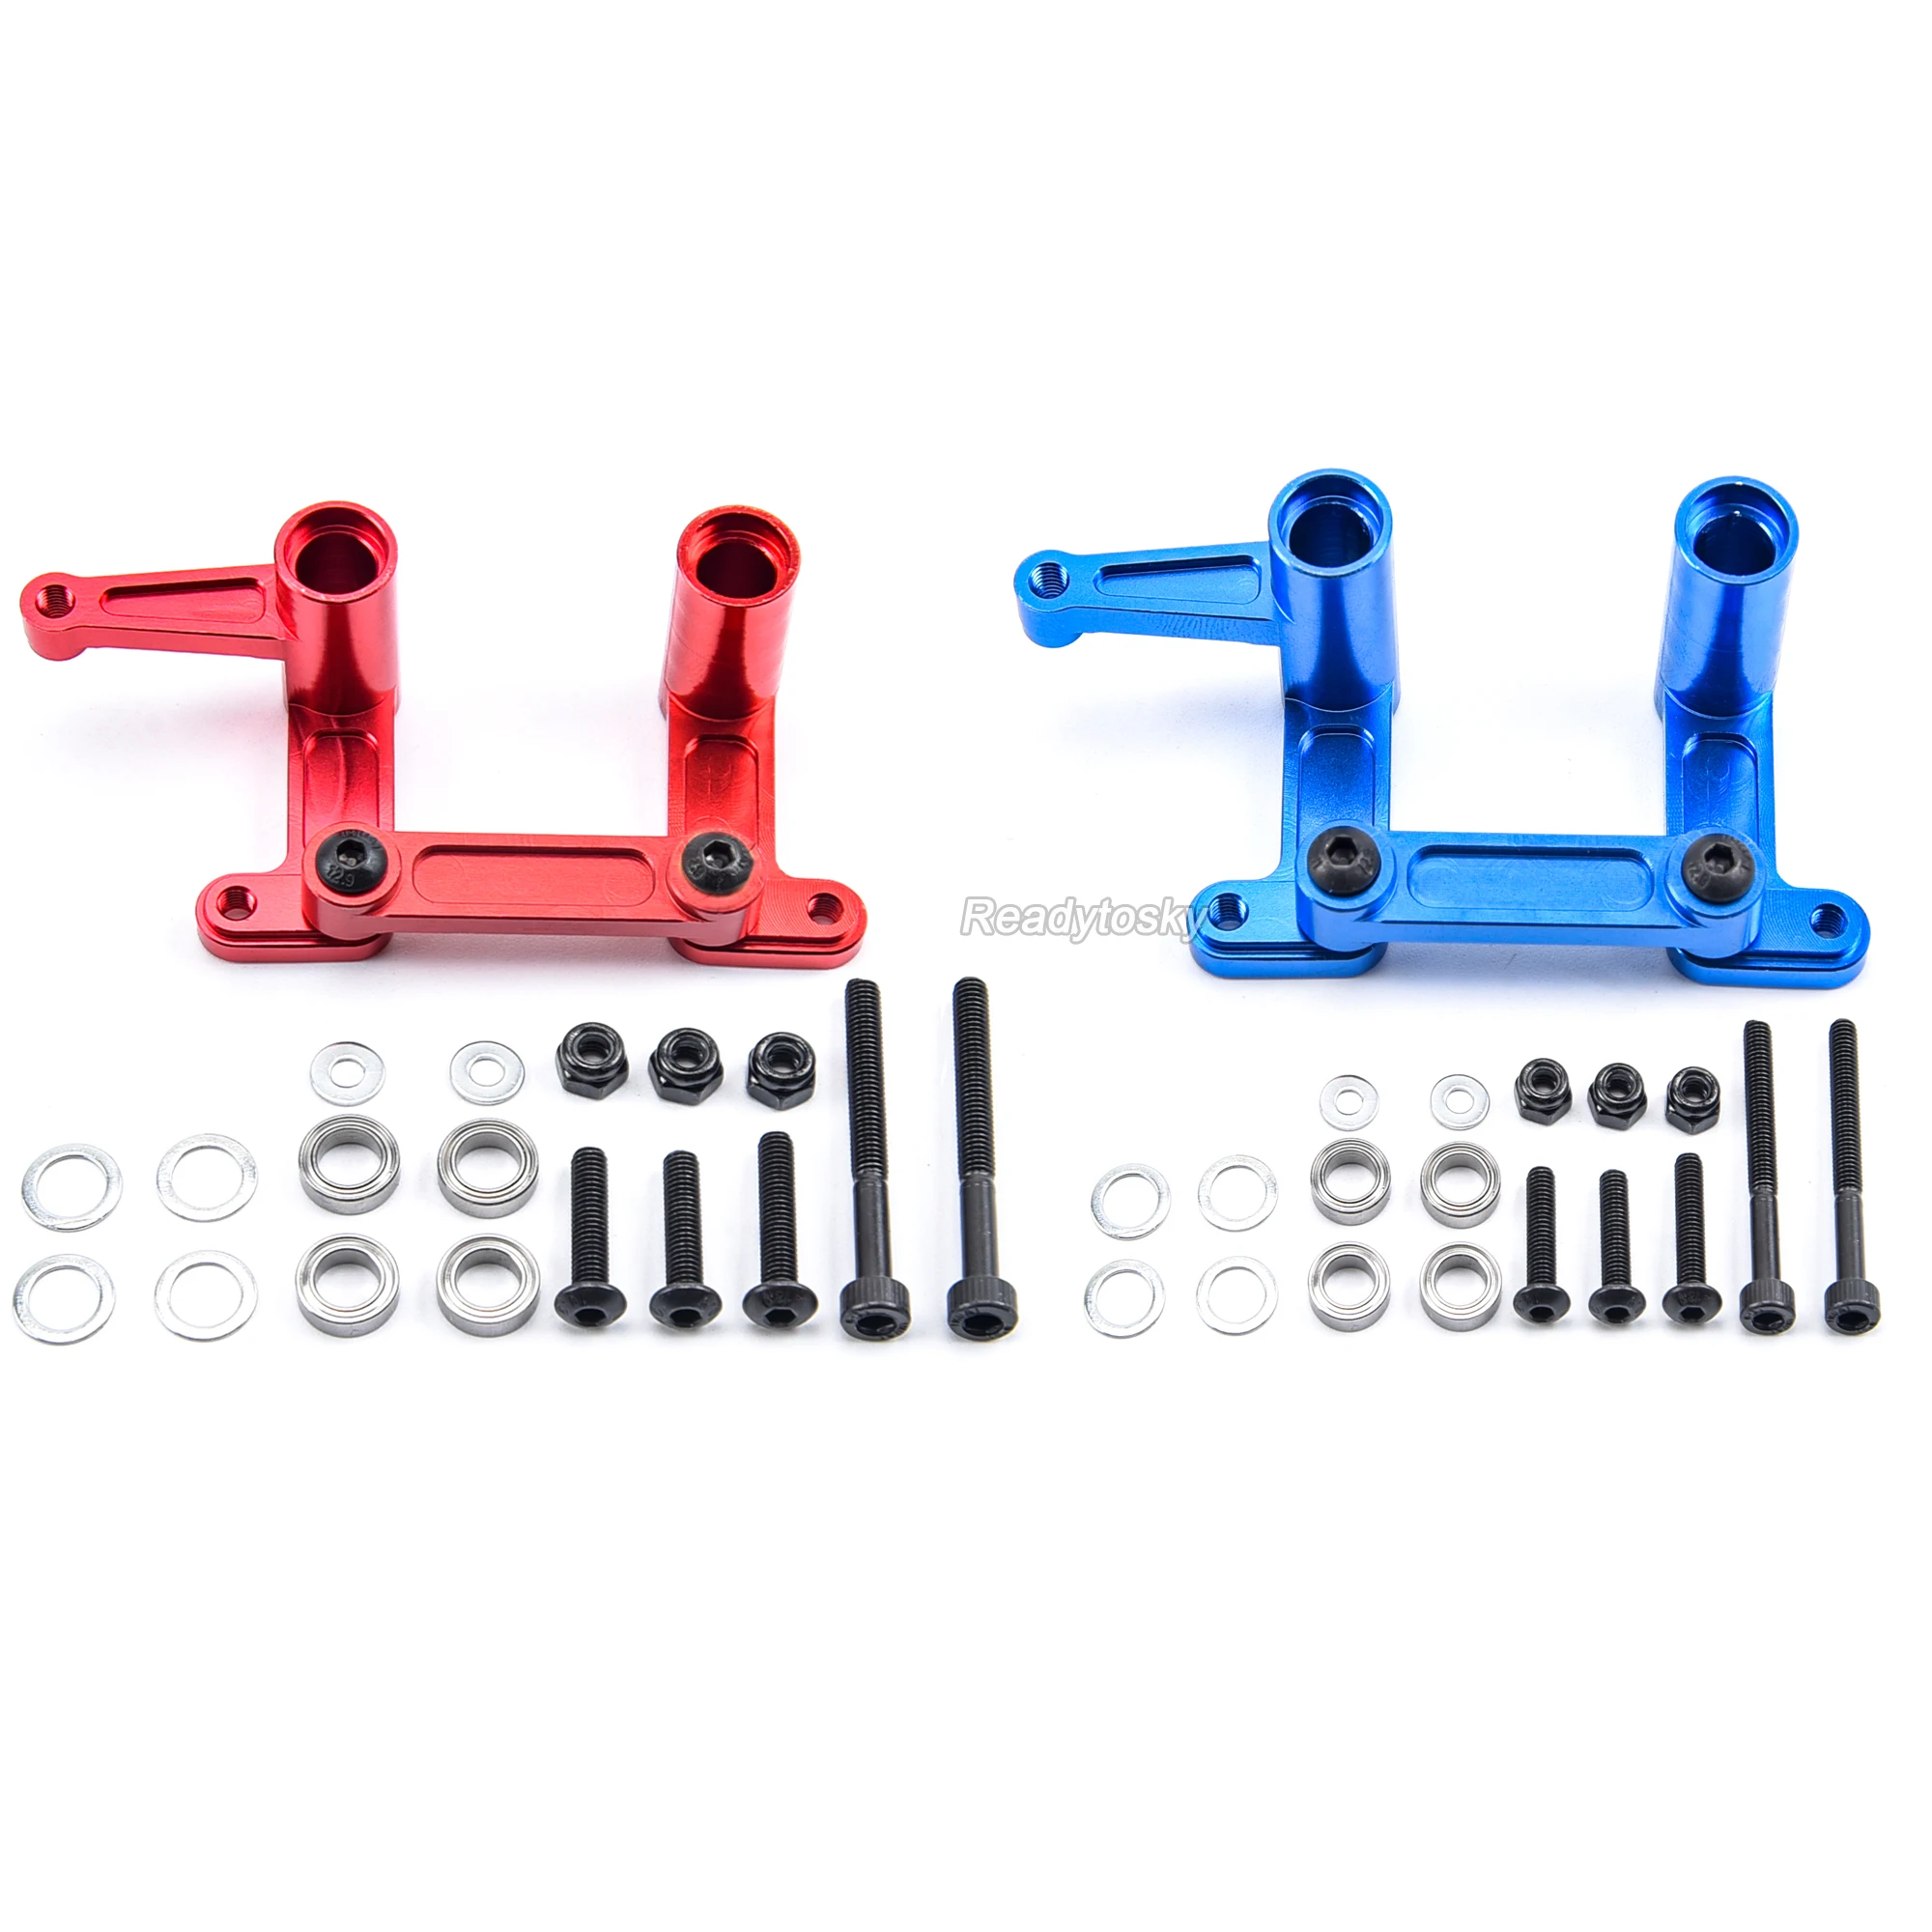 Traxxas Stampede 4x4 VXL Alloy Steering Bellcrank Assembly Blue by Atomik 